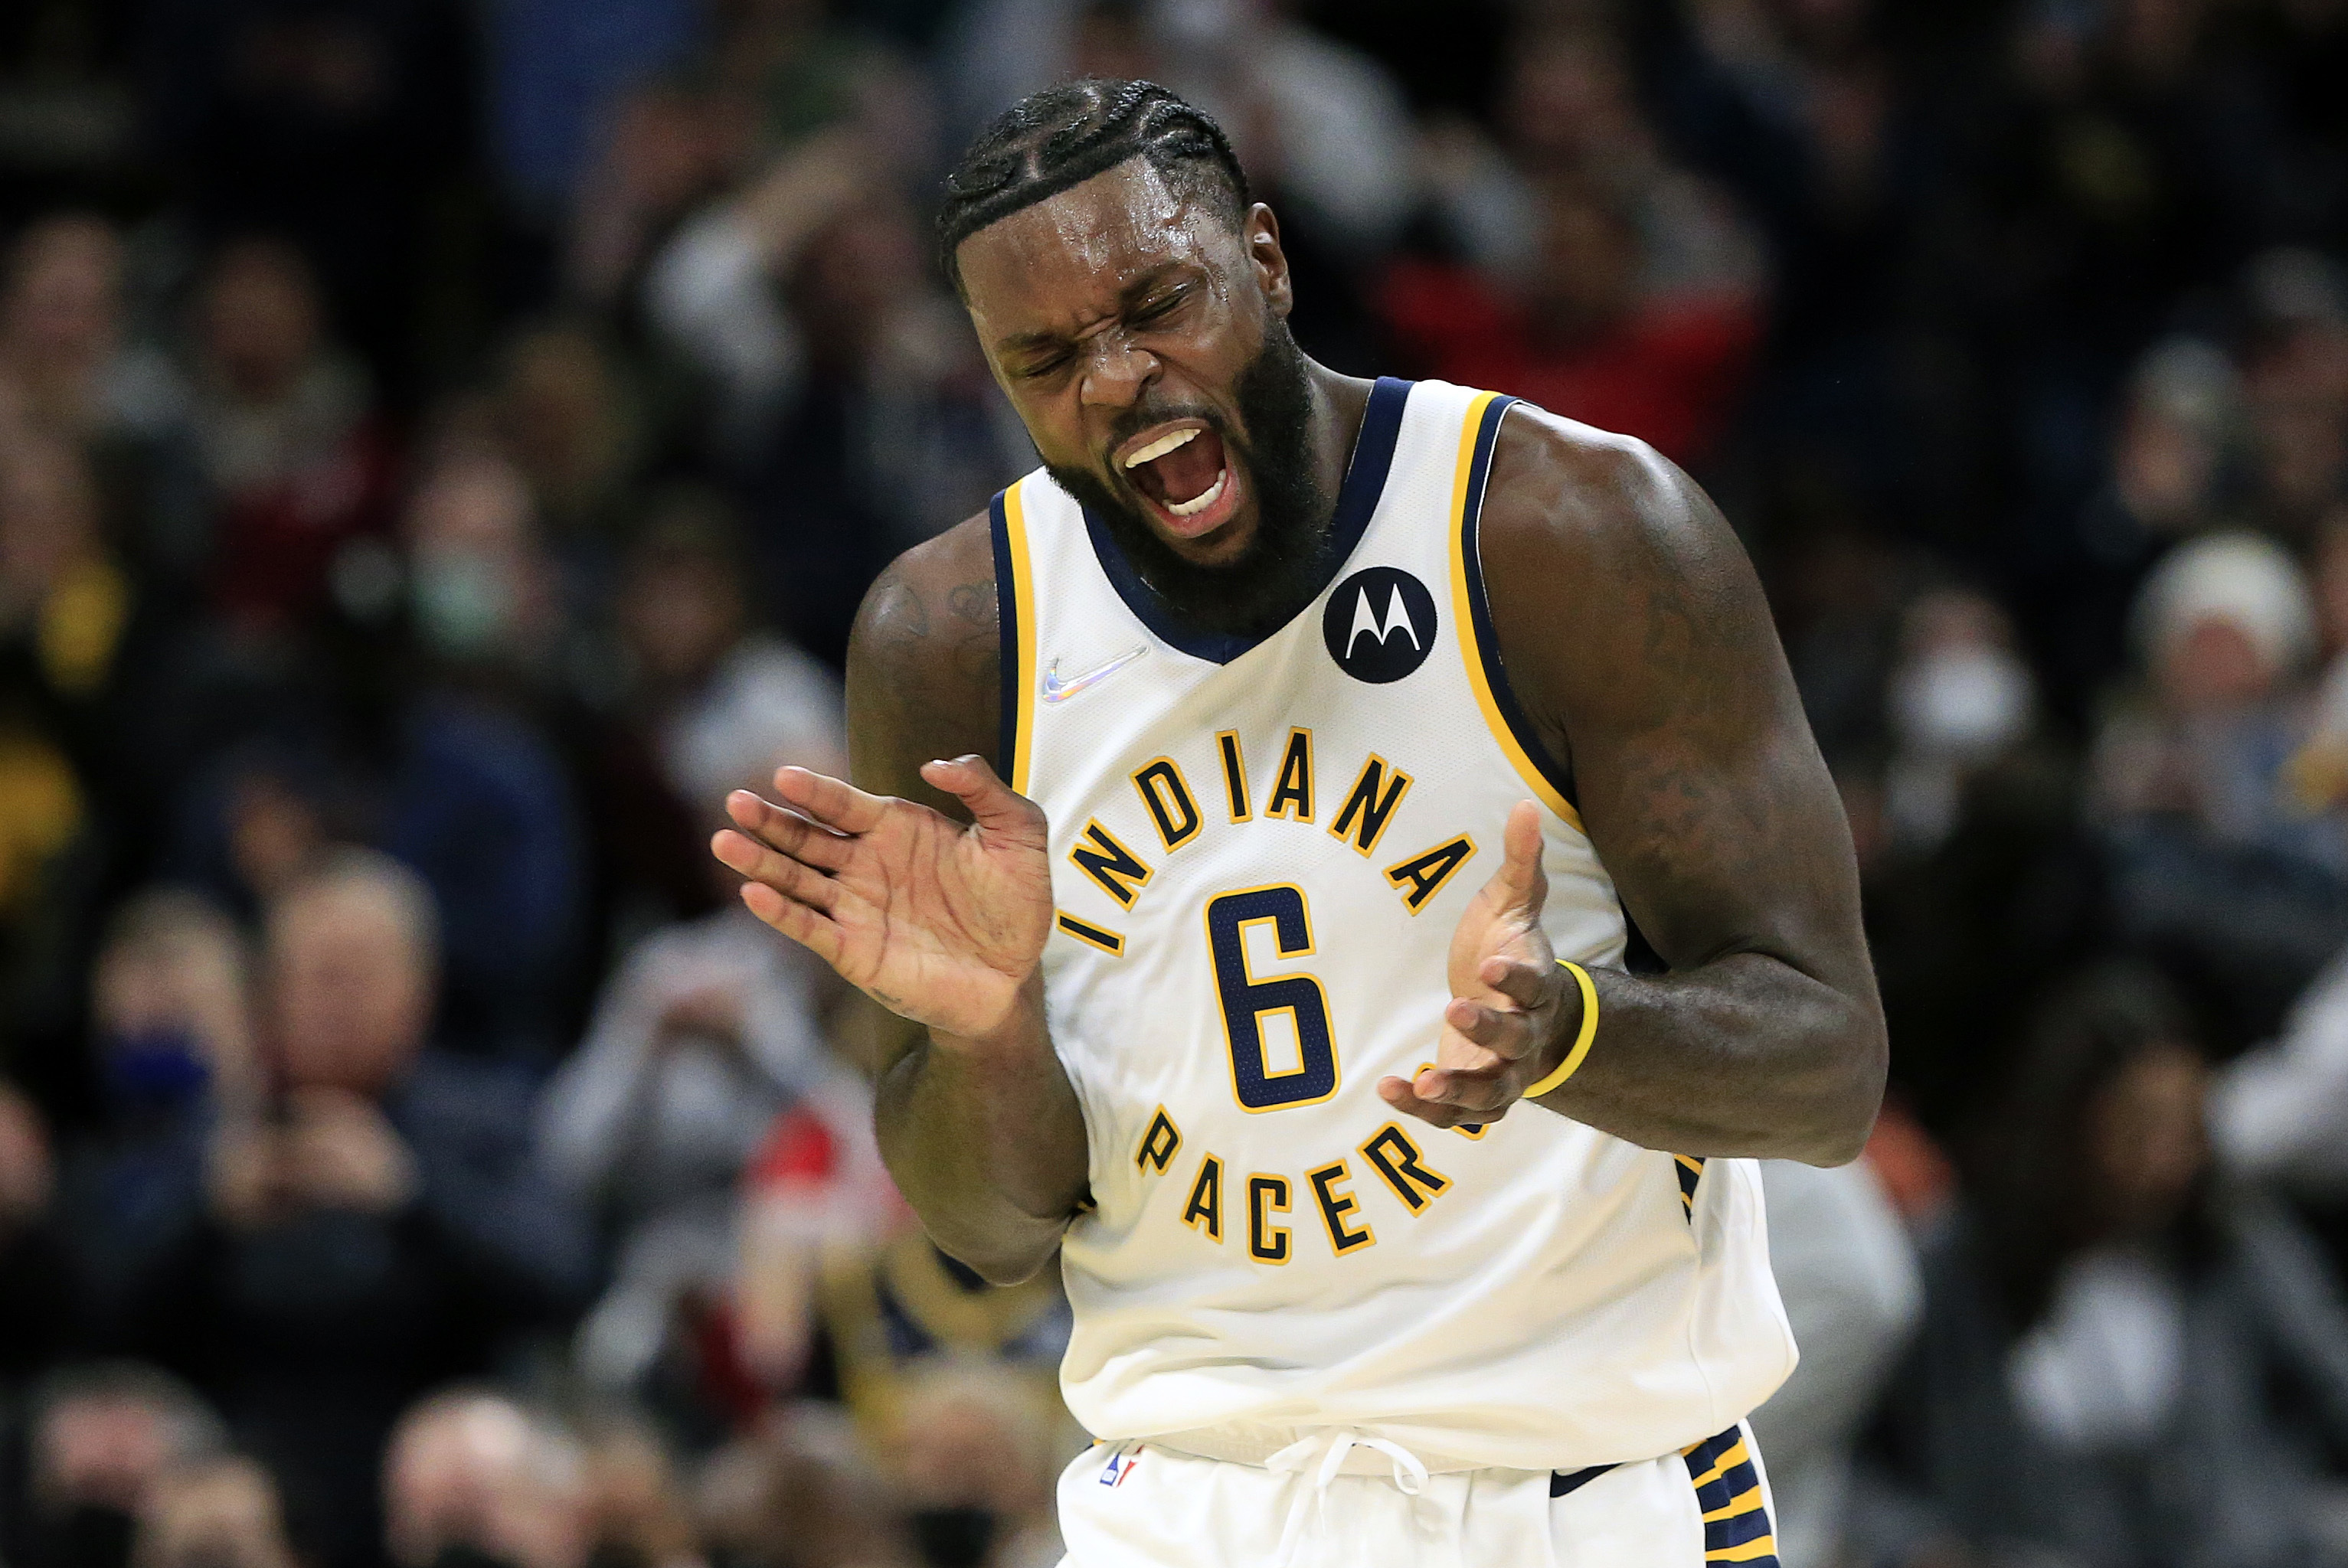 Nets vs. Pacers: Lance Stephenson scores 20 points in first quarter